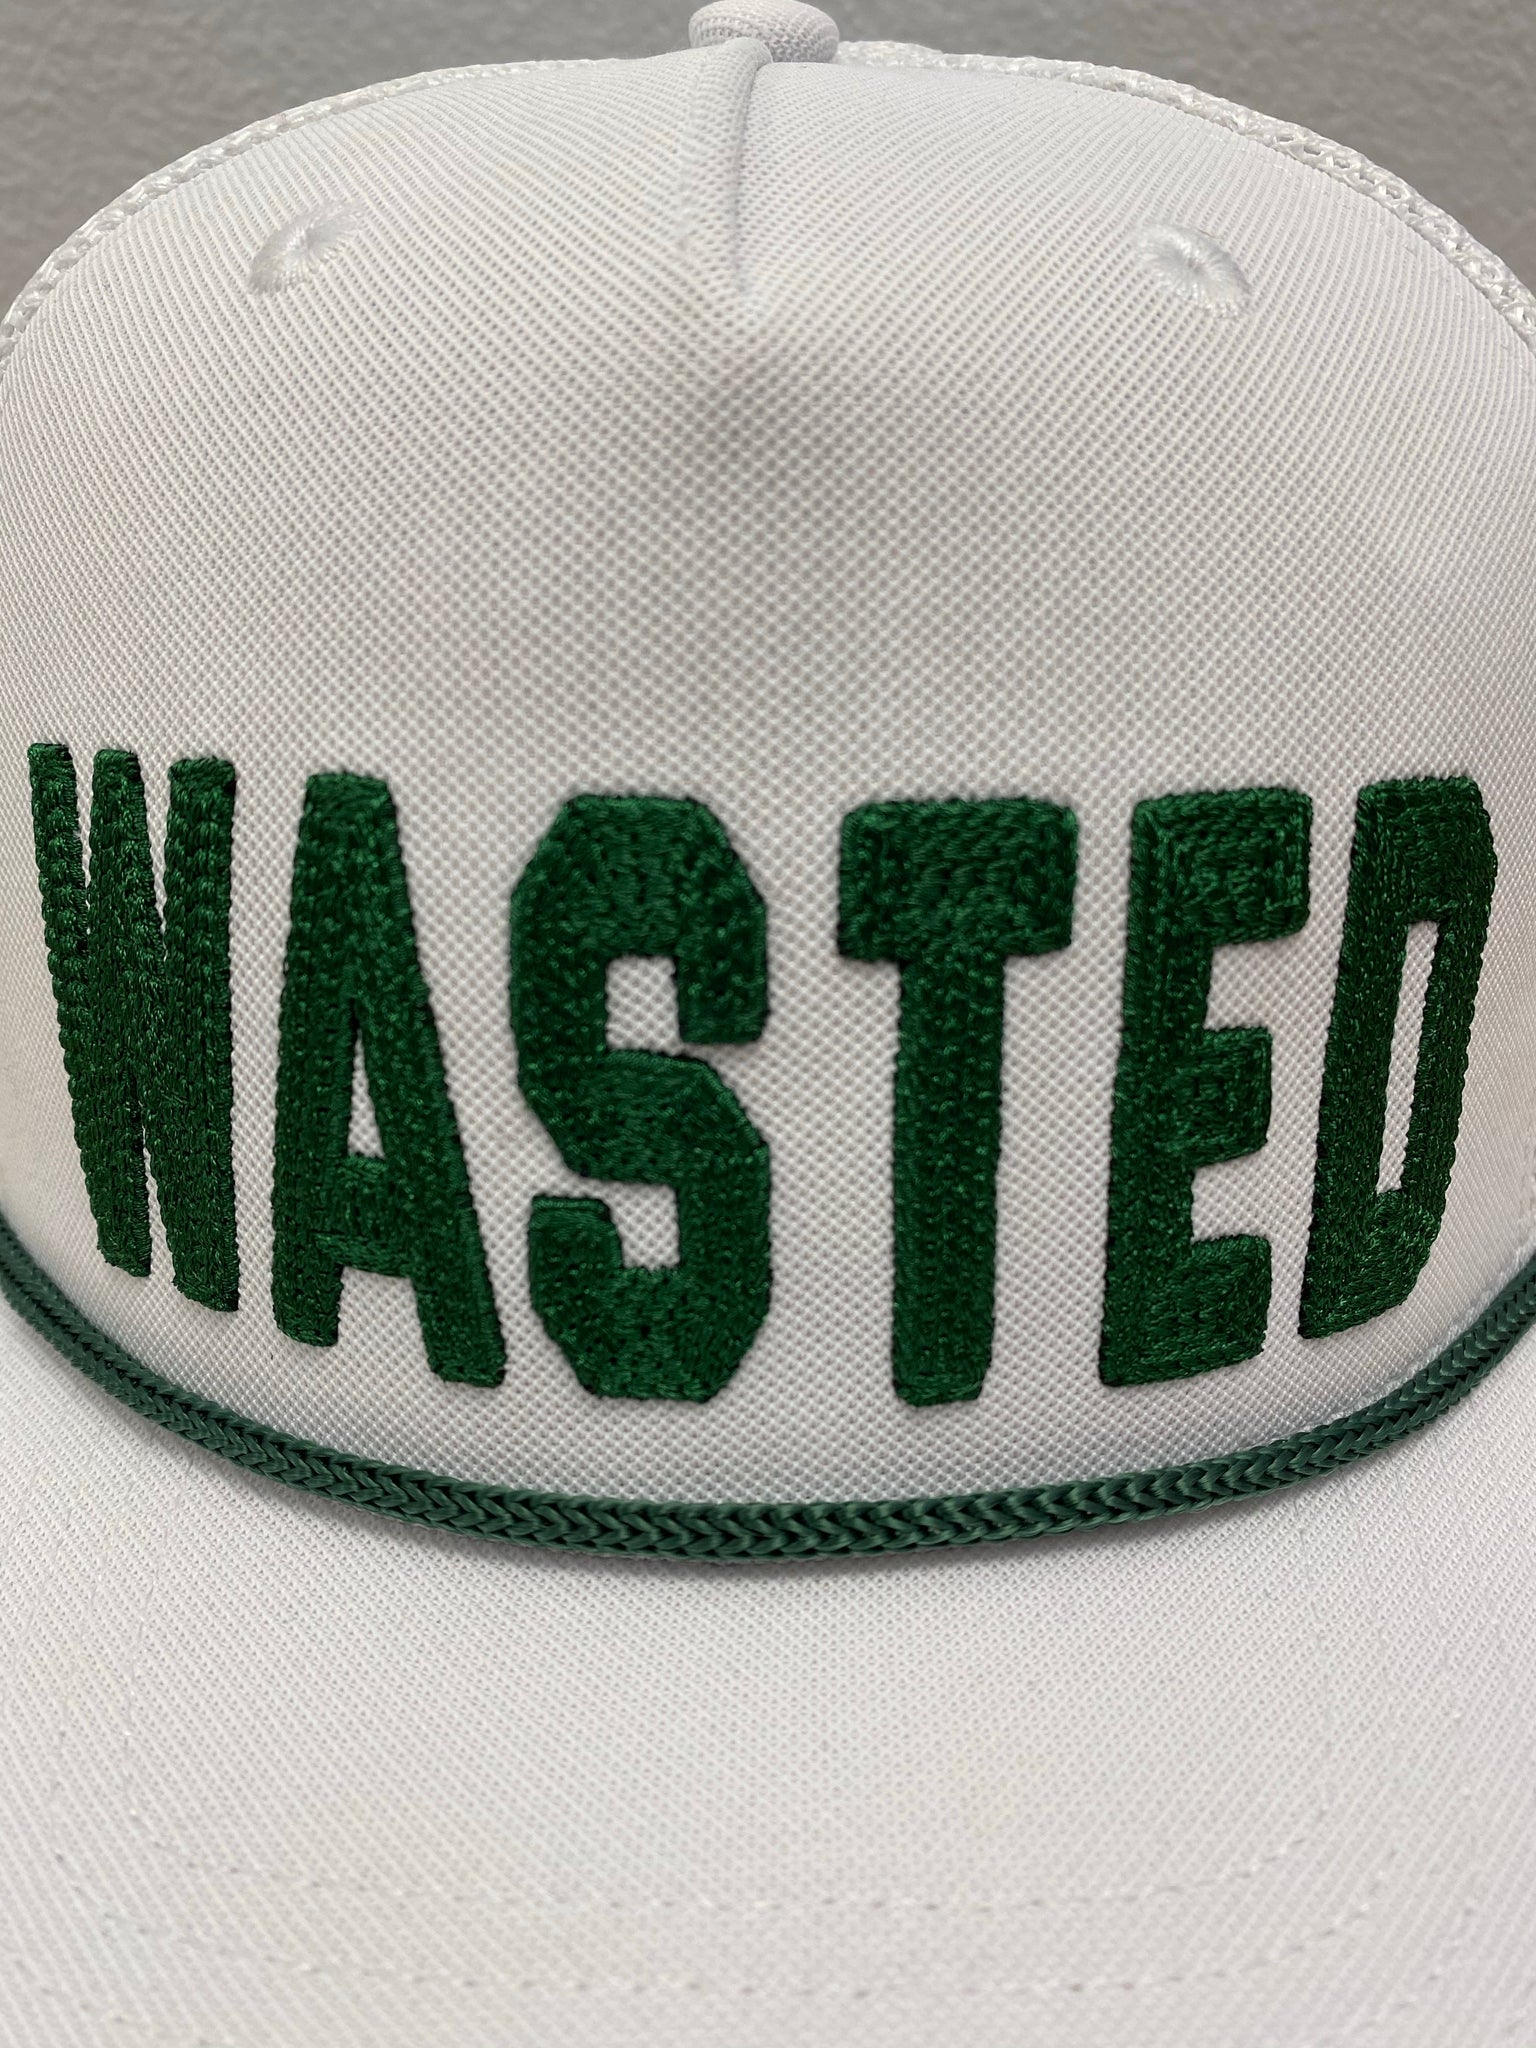 WaStEd Management ROPE Snapback Flat Bill WHITE